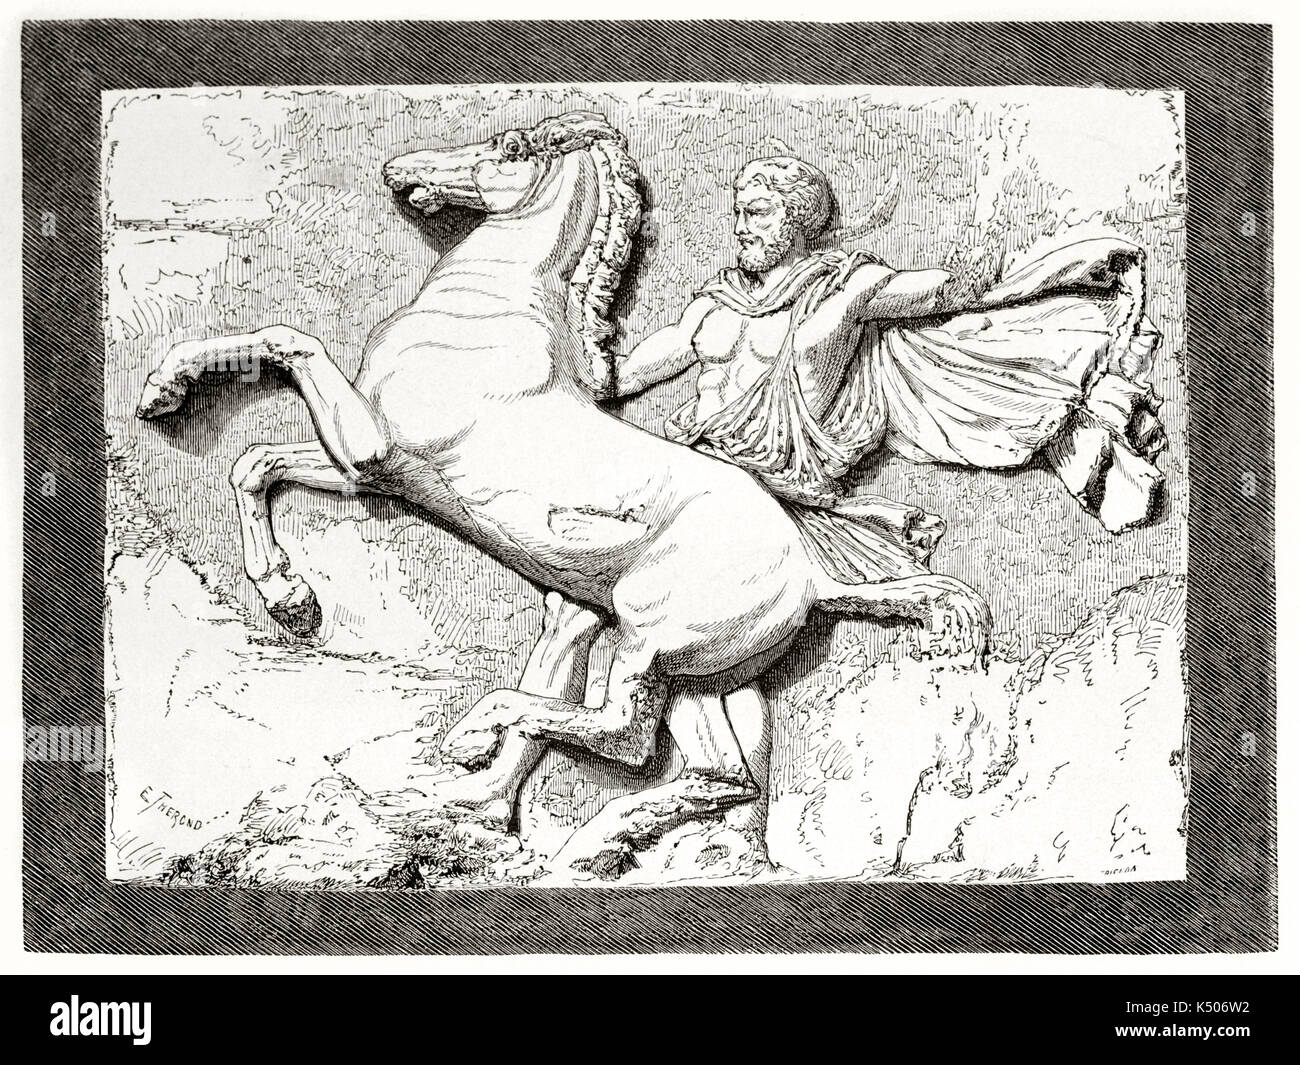 Old engraved reproduction of a high relief metope sculpture by Phidias in the Parthenon Athens representing a man and a rearing horse. By Therond published on Le Tour du Monde Paris 1862 Stock Photo